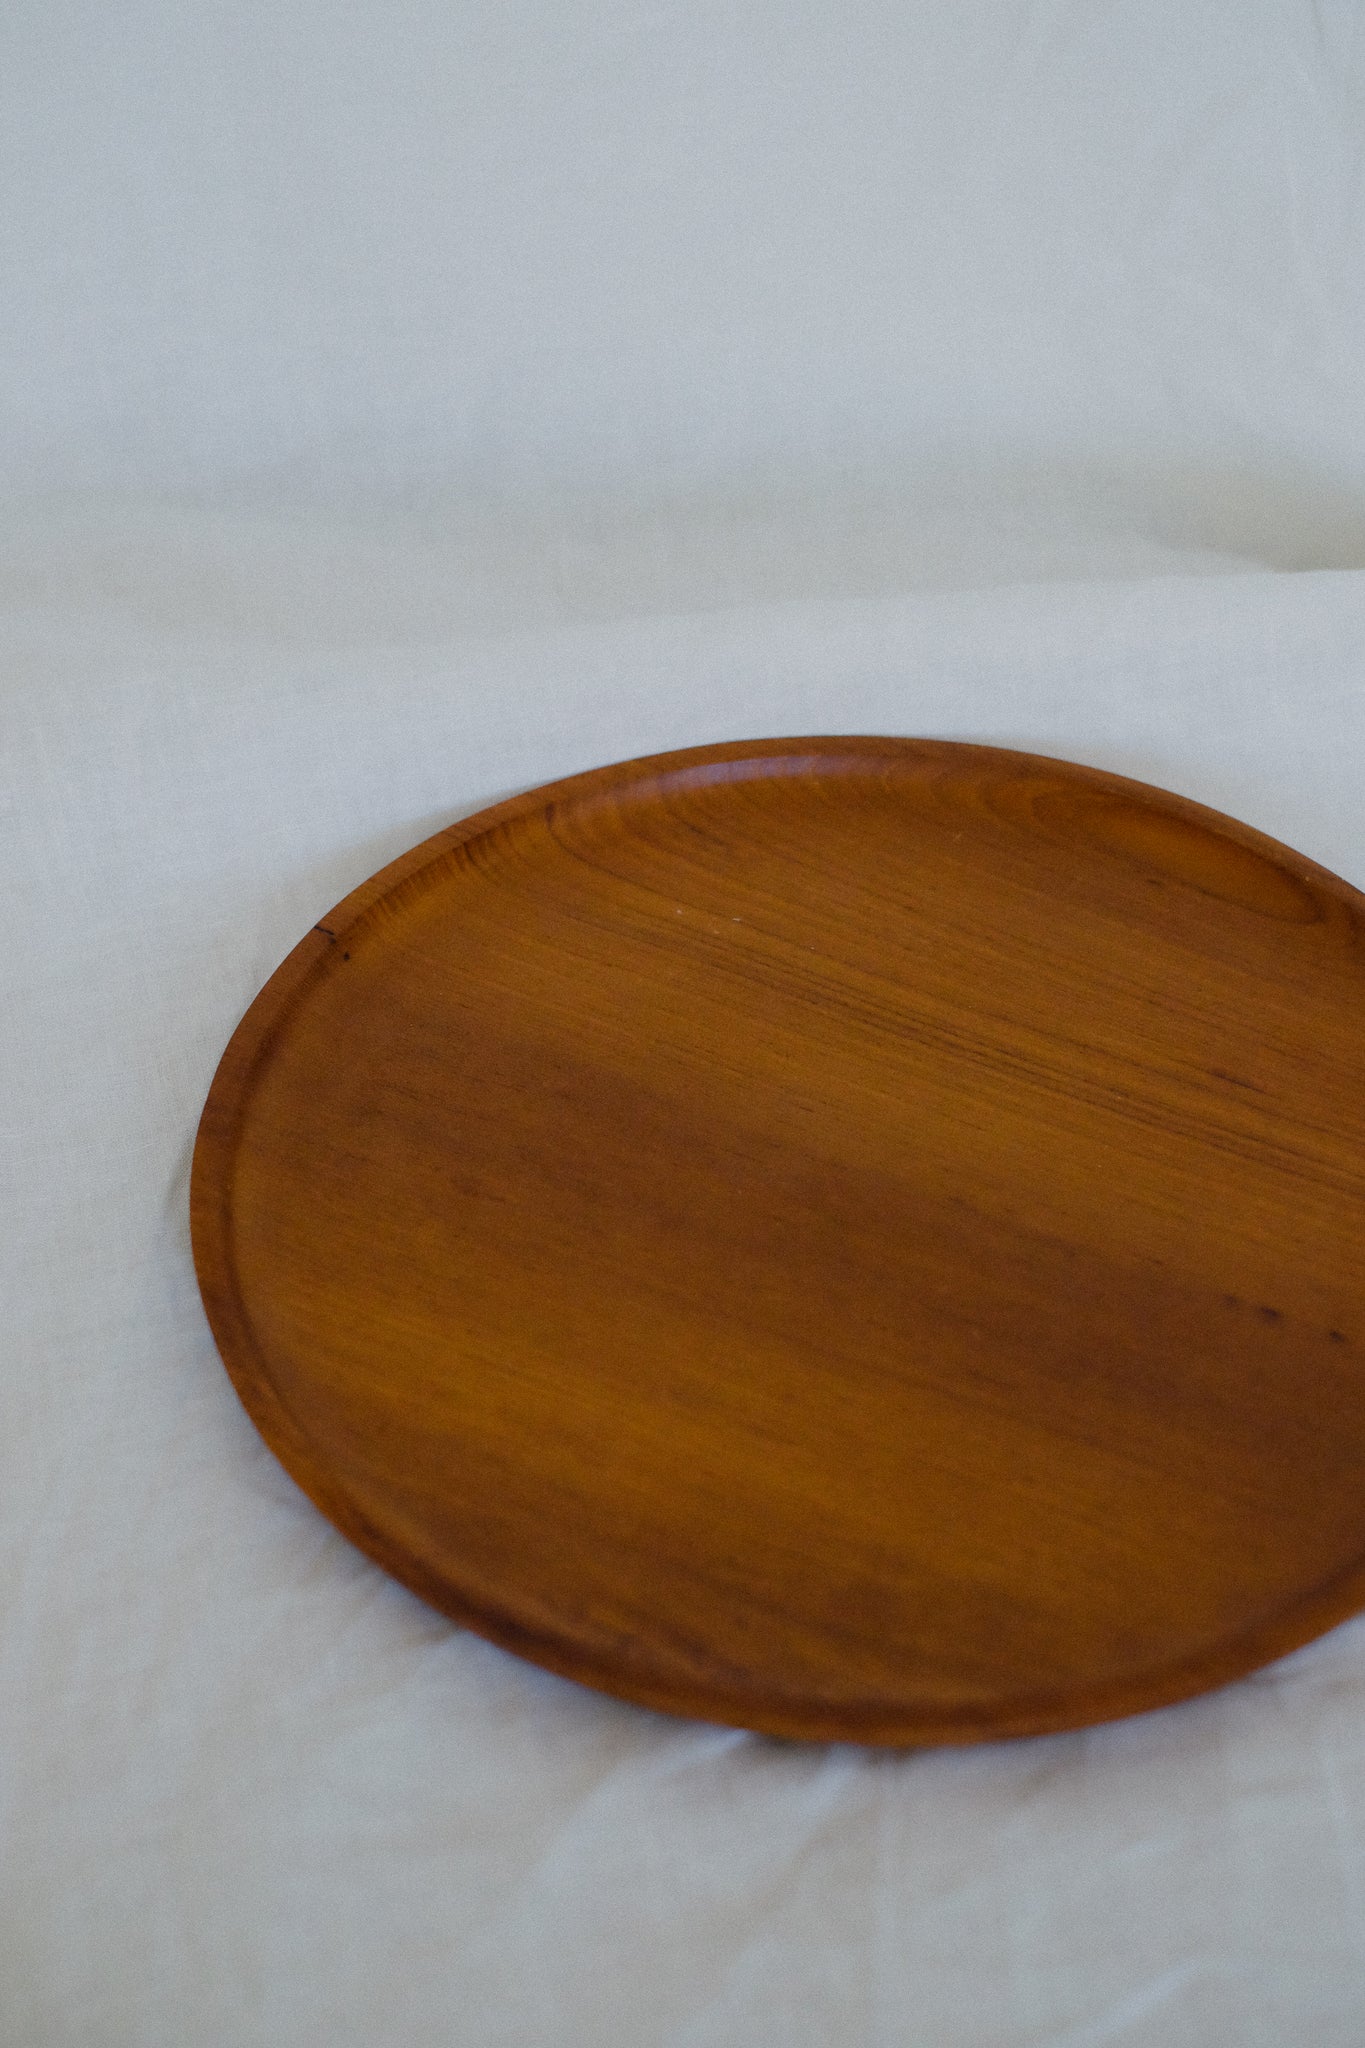 wooden serving tray